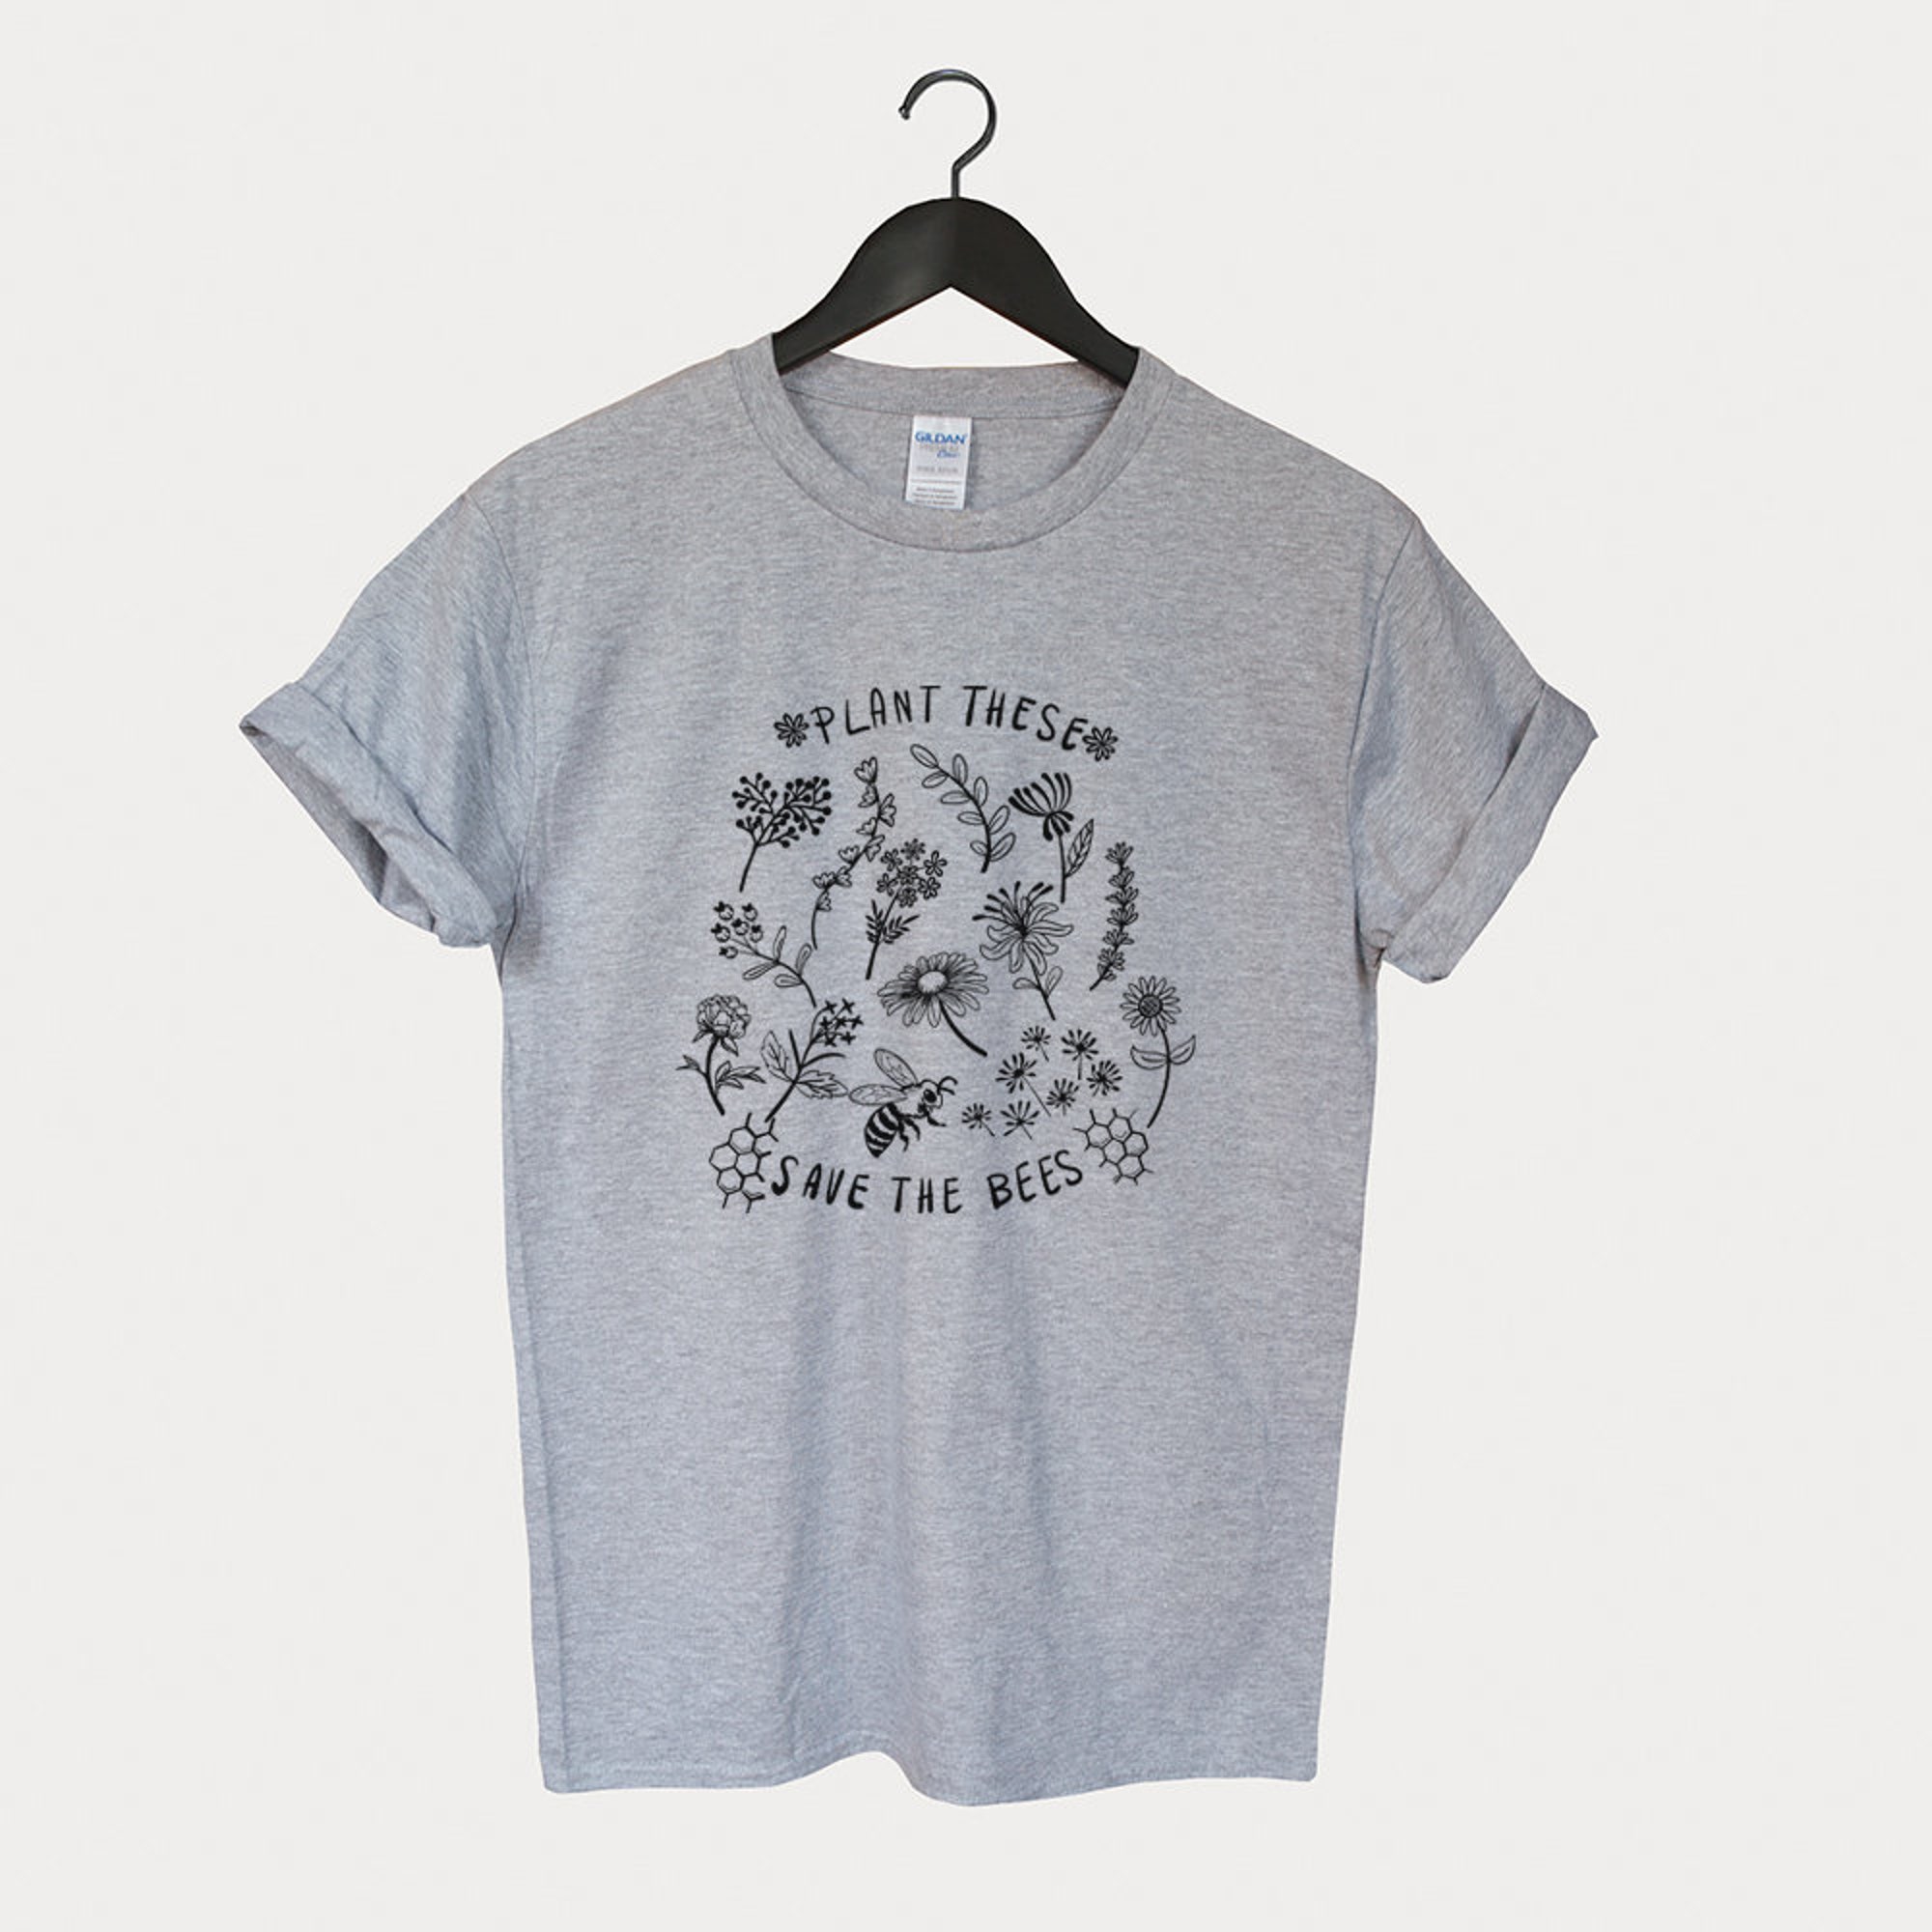 Save the planet, Clean The Seas shirt